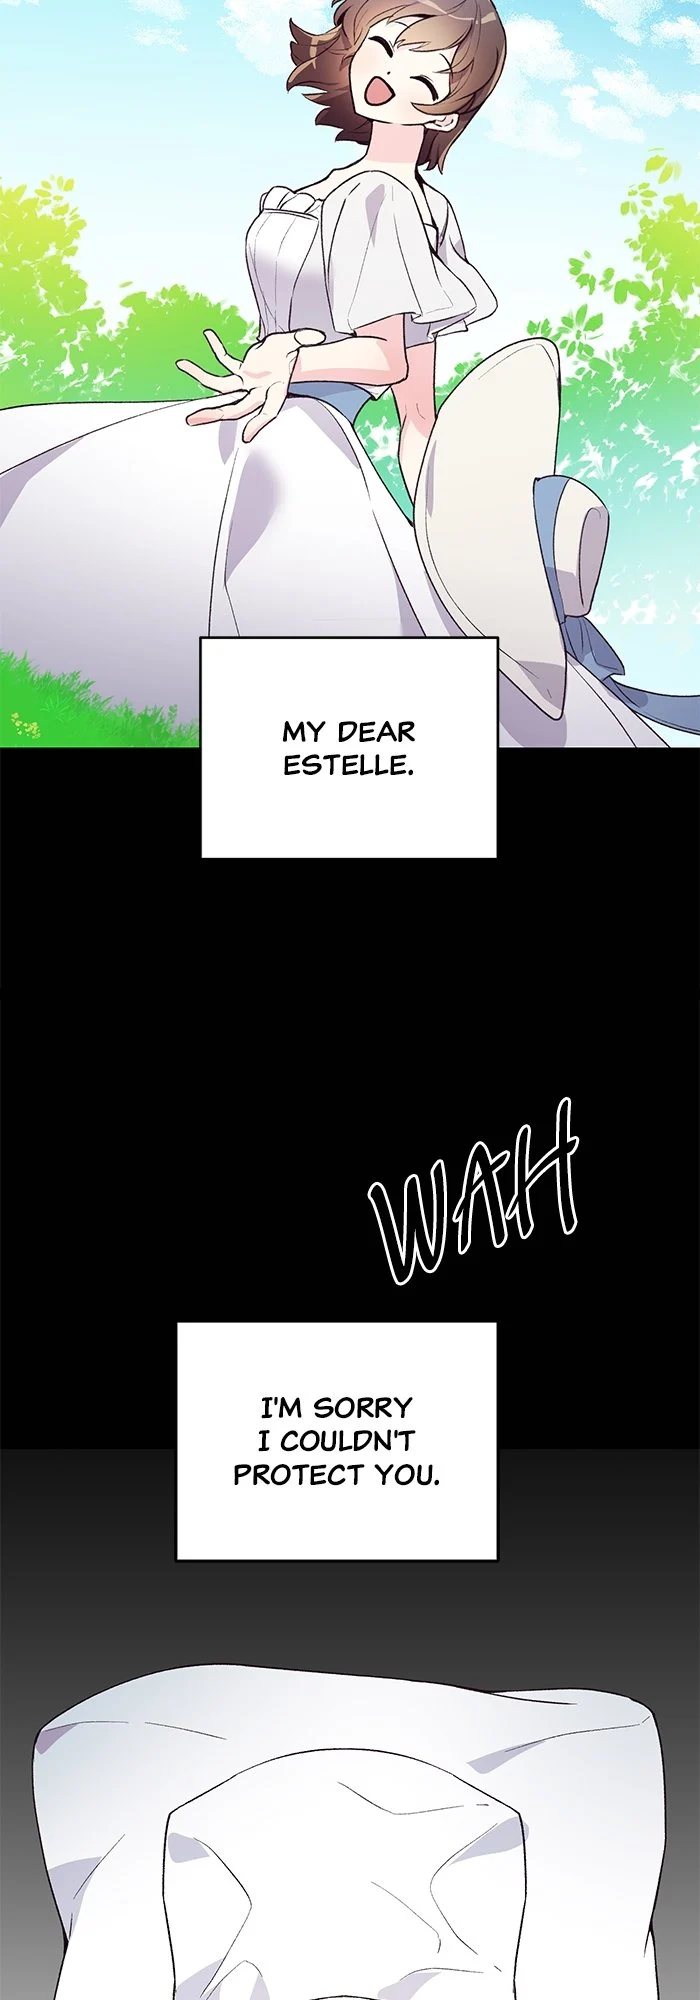 Fiance In Crisis - Page 4